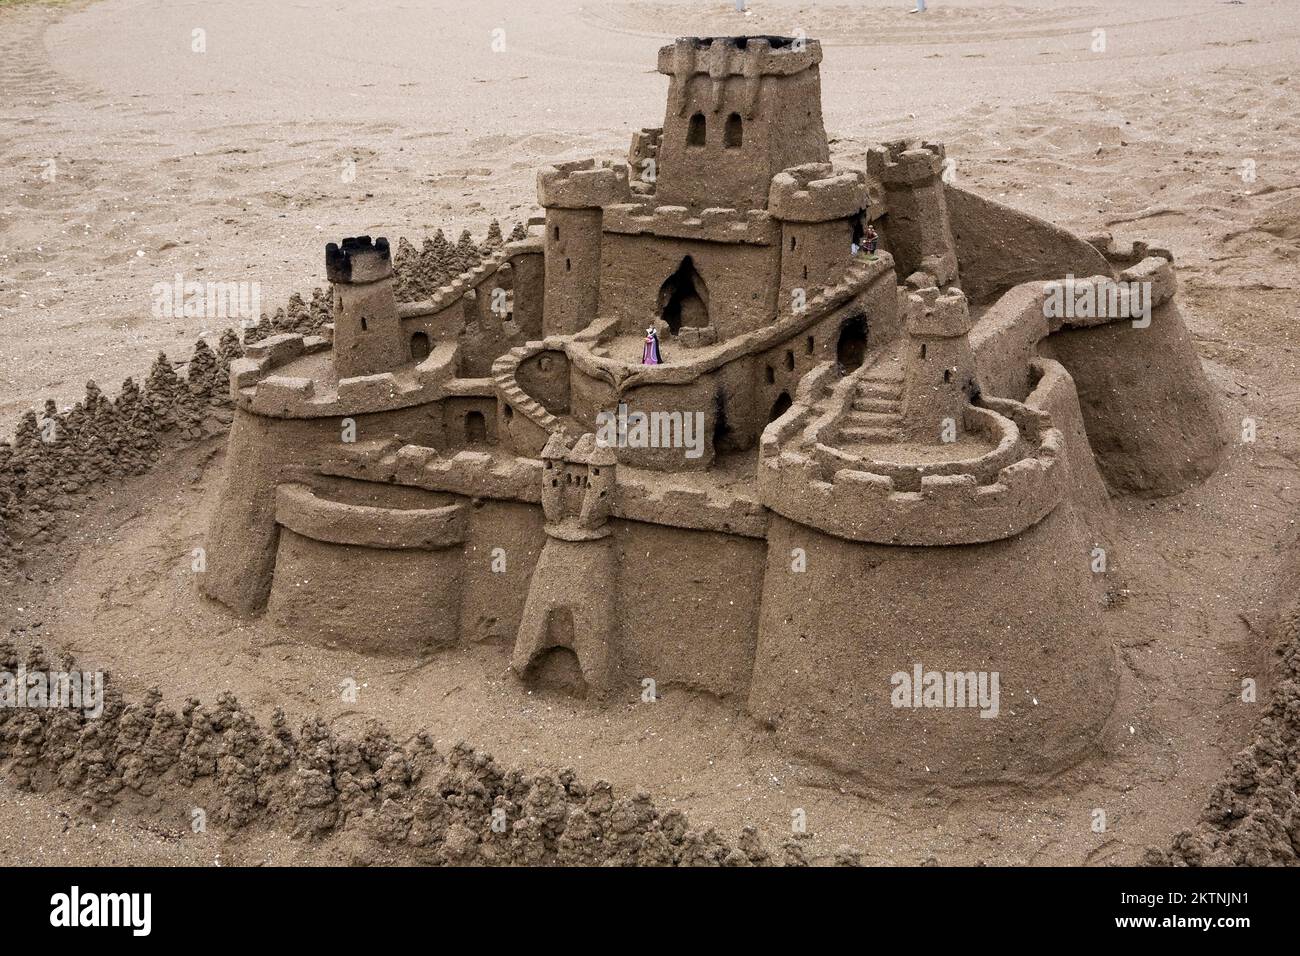 Close-up of a medieval shaped sandcastle, Torremolinos, Costal del Sol, Spain. Stock Photo